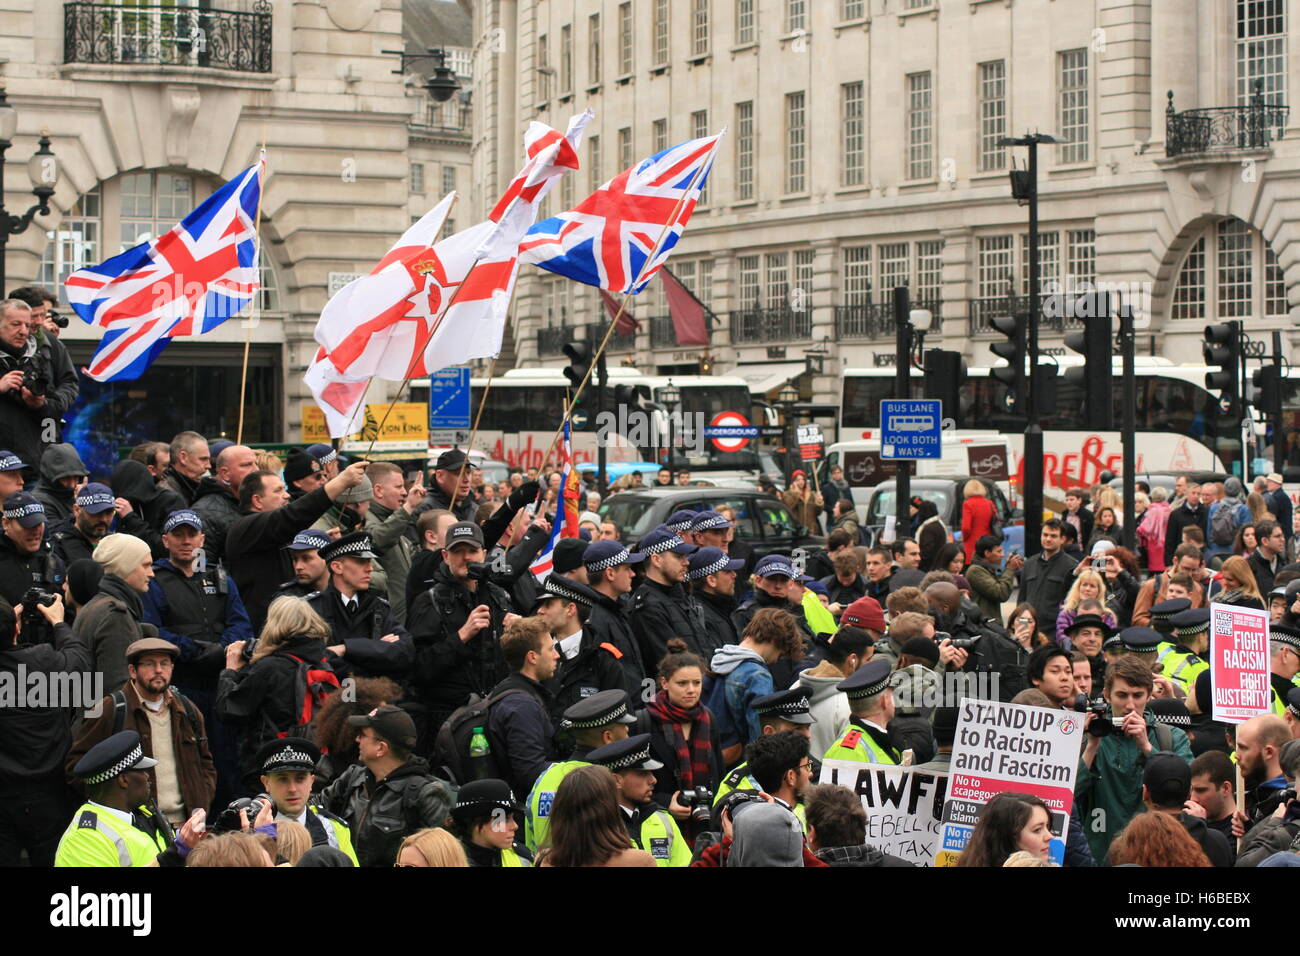 Nationalist 'Christian vanguard' group Britain First demonstrate counter to anti-fascist protesters who have come out in the streets of London to protest against the far right and racism on Piccadilly Circus. The protests are separated by a line of police officers. Stock Photo